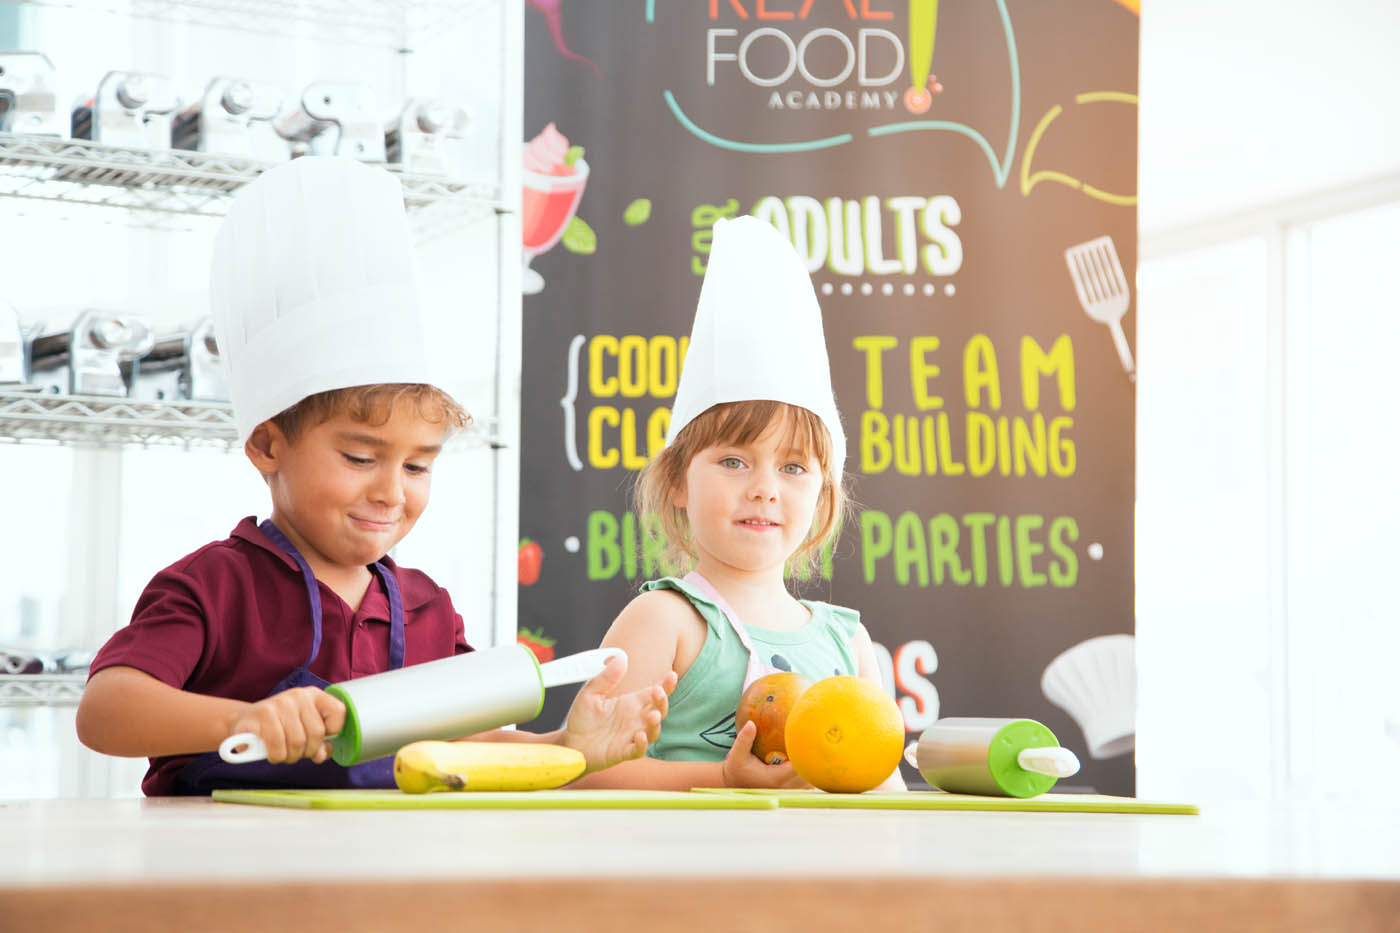 The Real Food Academy Miami - Fun Cooking Summer Camp in Miami, FL. Real Food Academy